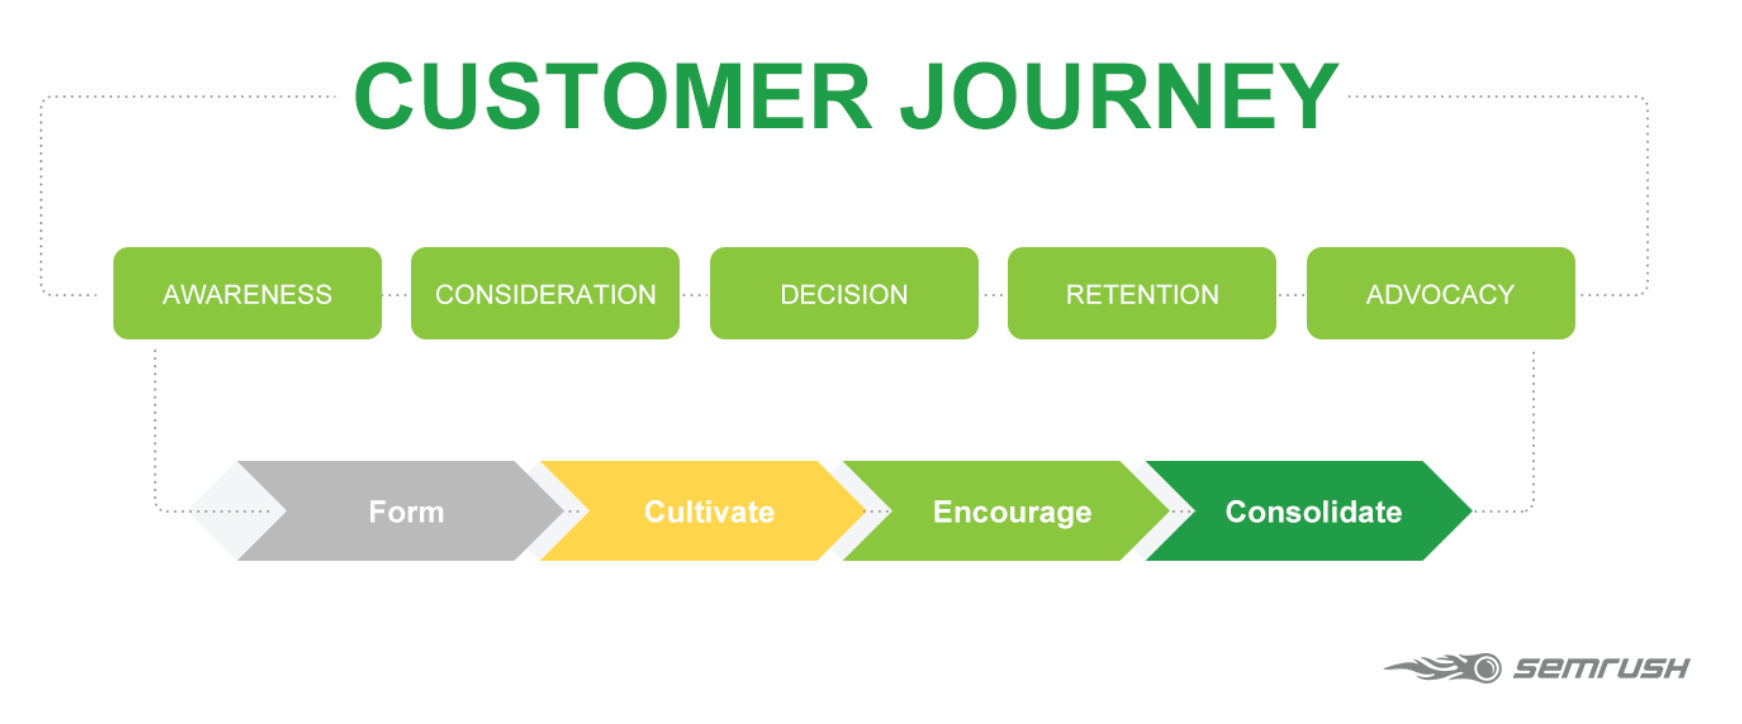 Customer Journey and Content Marketing